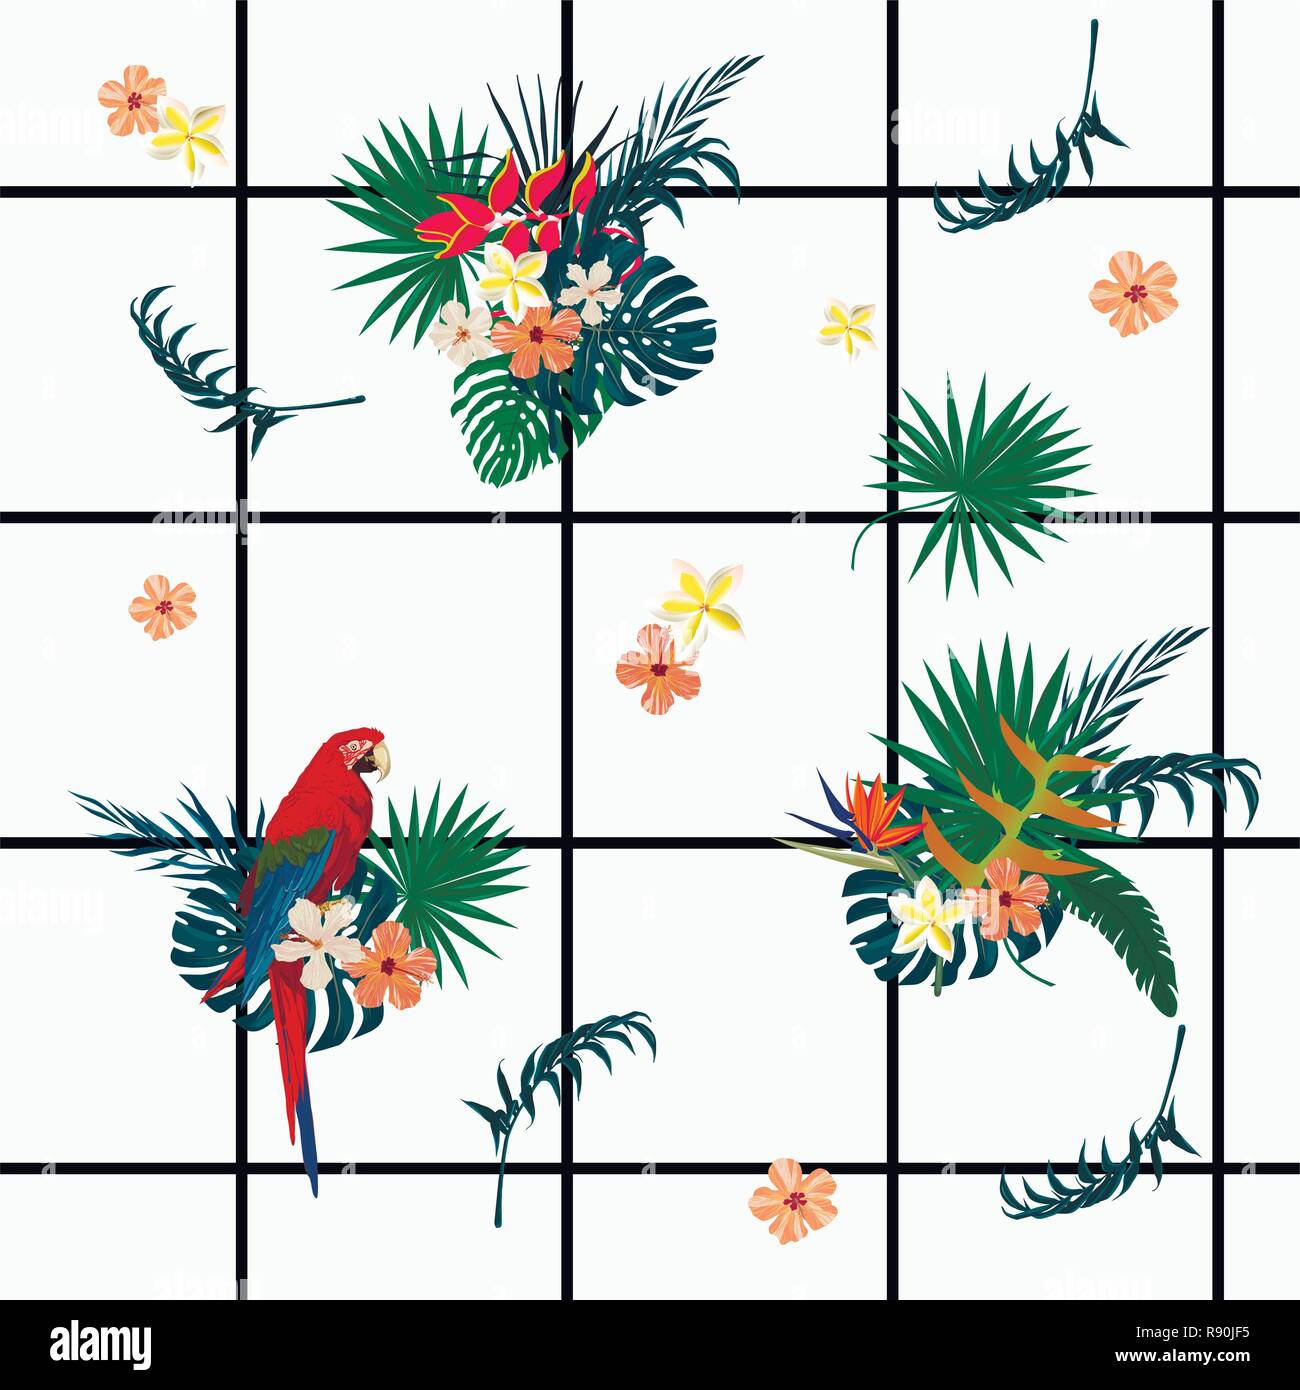 Seamless vecor exotic geometrical pattern with cells, parrots, flowers, feathers. Stock Vector